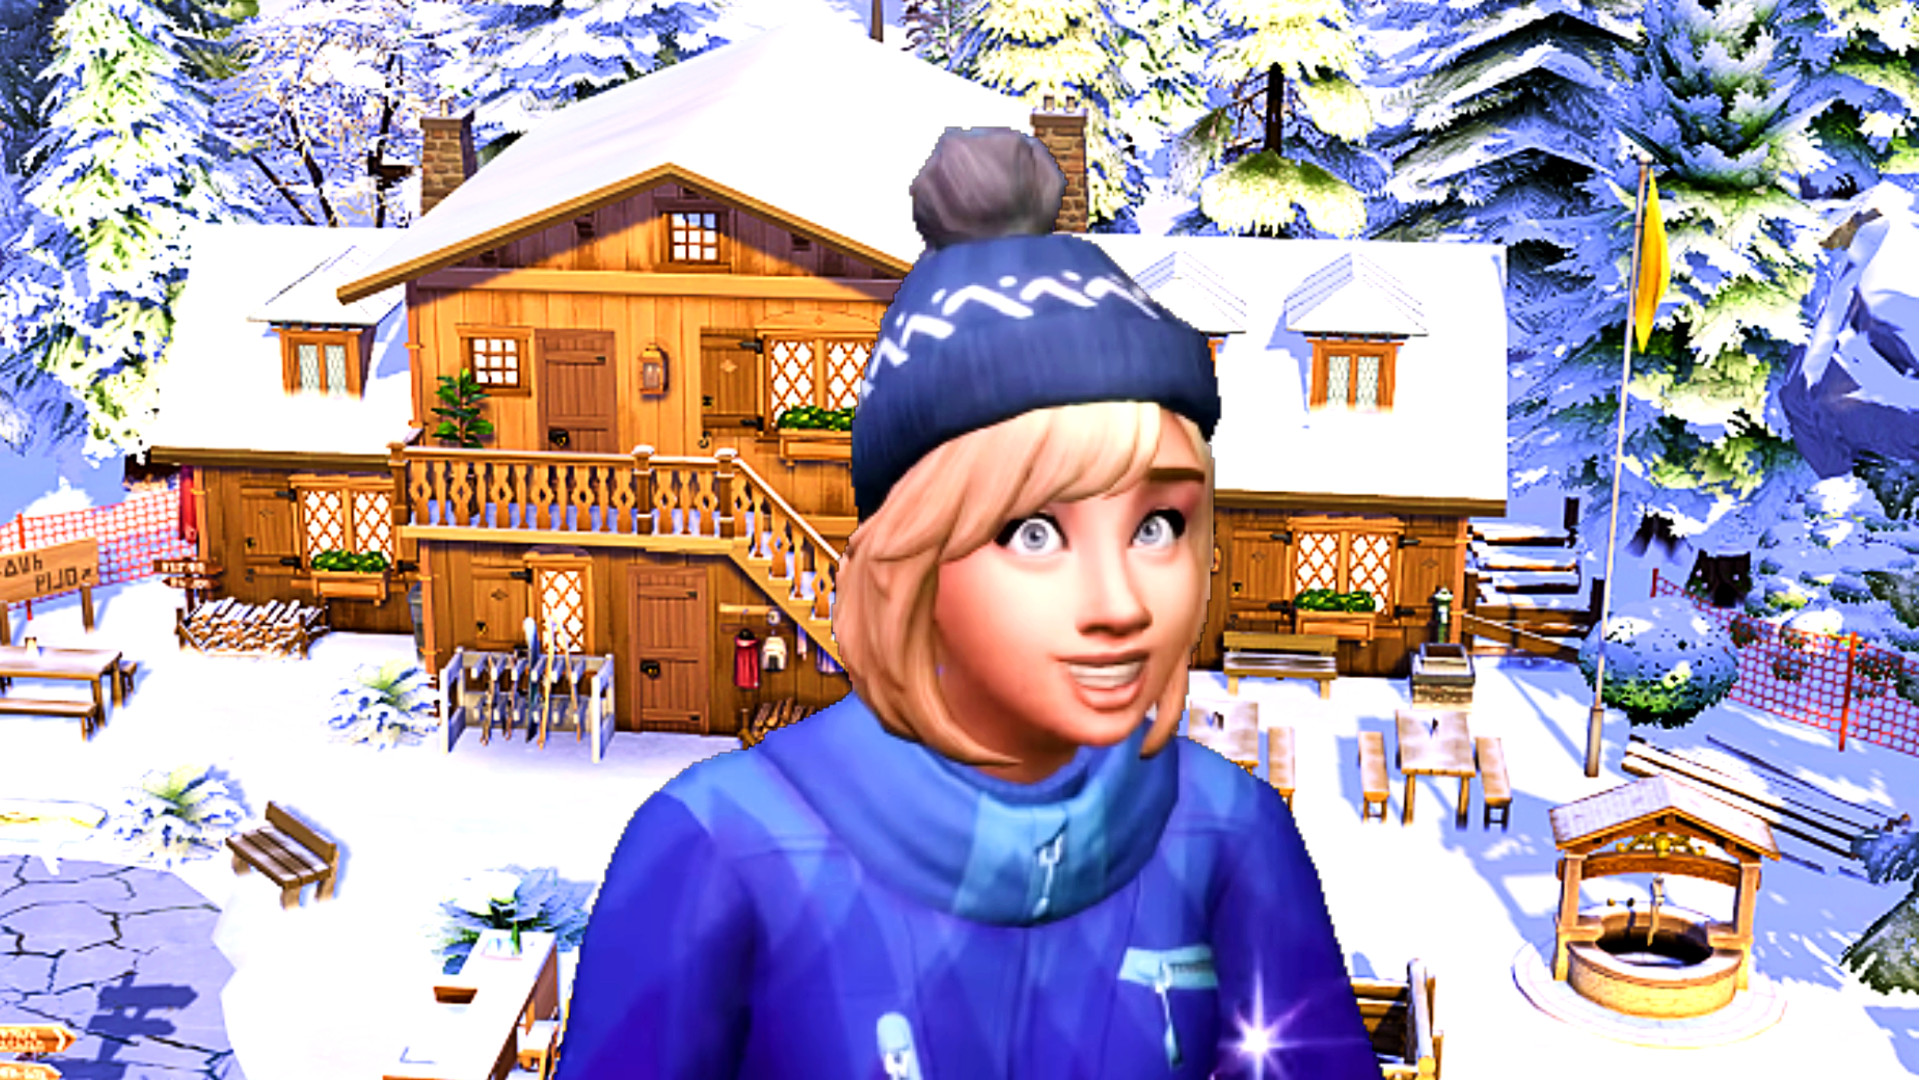 Sims 4 house build is perfect for that winter Christmas spirit